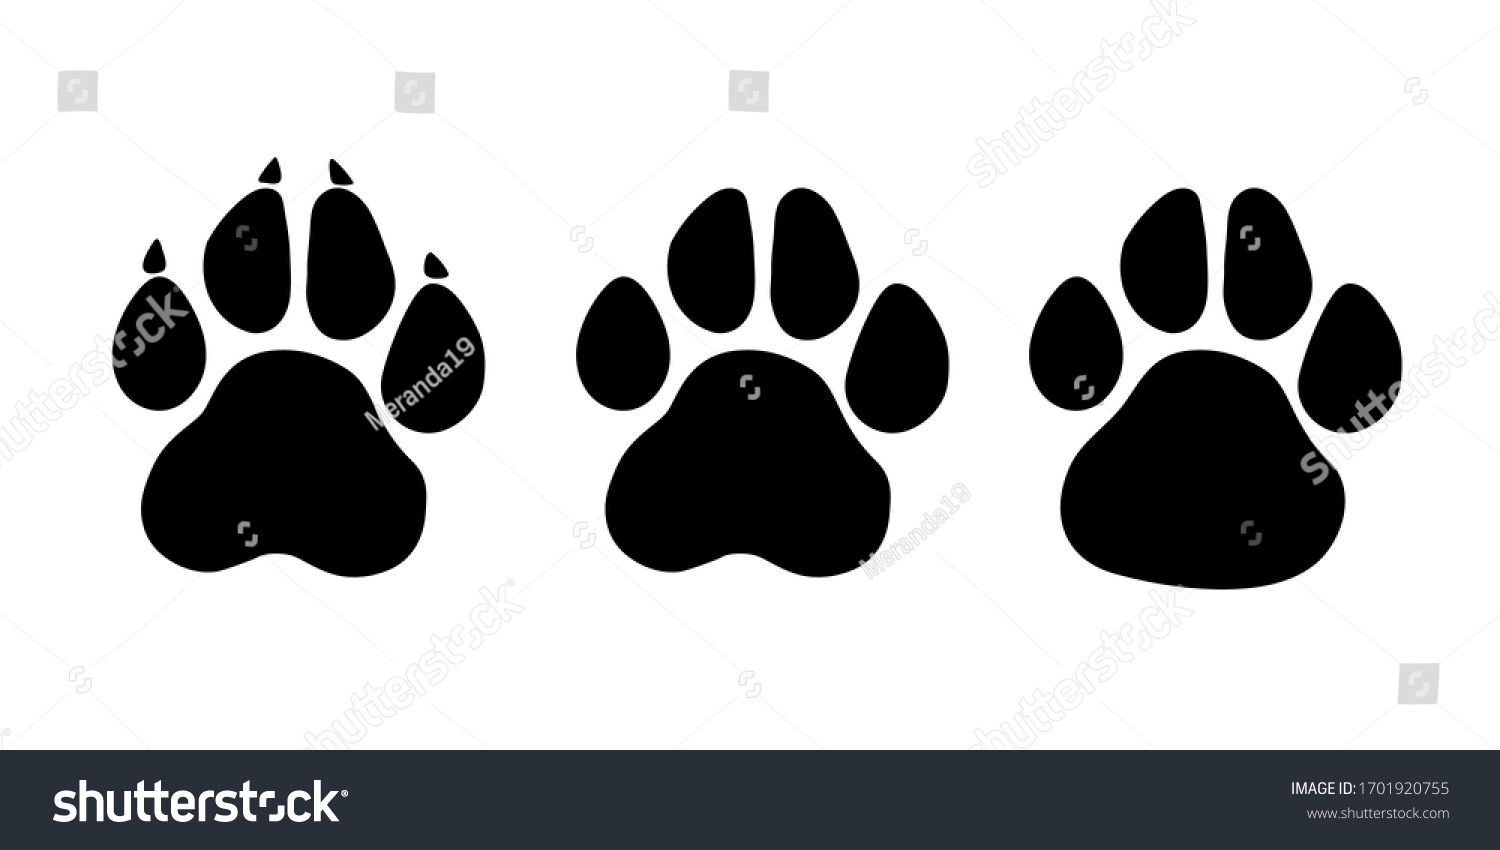 SVG of Paw print set. Paw foot trail print of animal. Dog, cat, bear, puppy silhouette. Collection of paw prints. Different animal paw - stock vector. svg